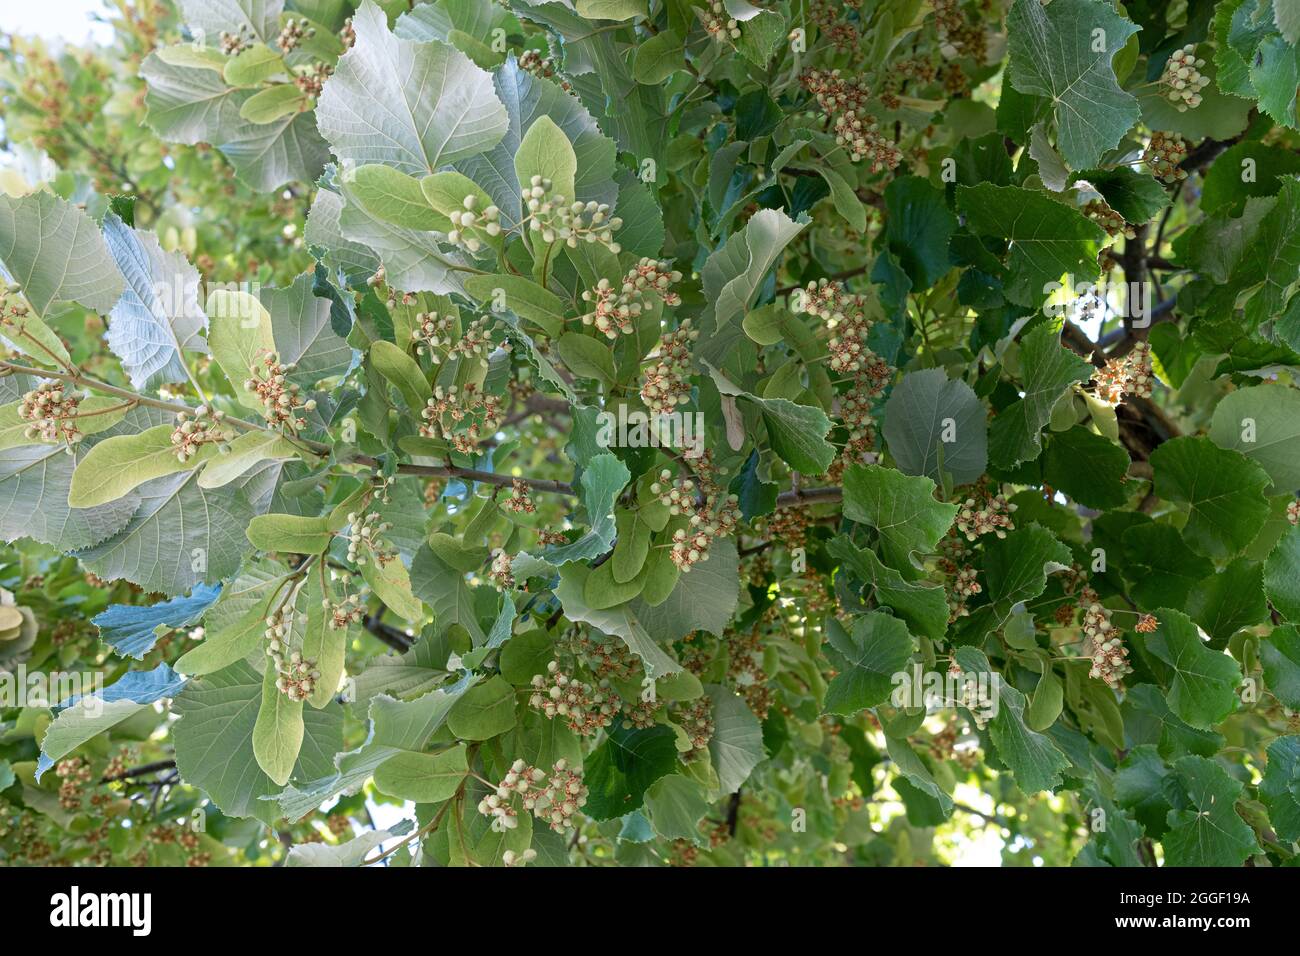 Linden tree branches full of buds Stock Photo